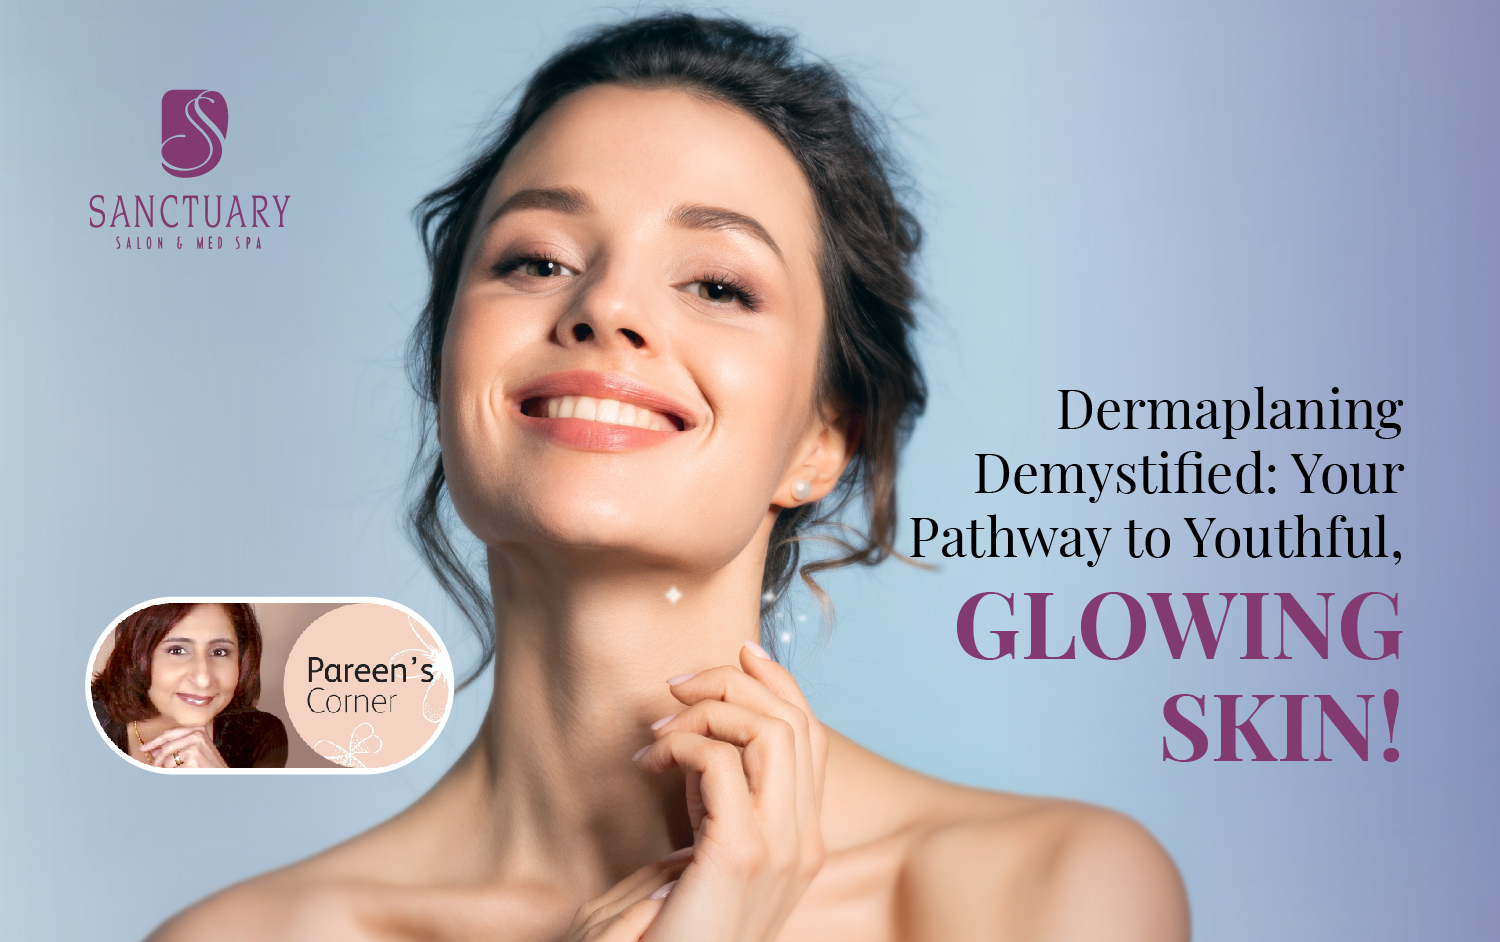 Dermaplaning Demystified: Your Pathway to Youthful, Glowing Skin!